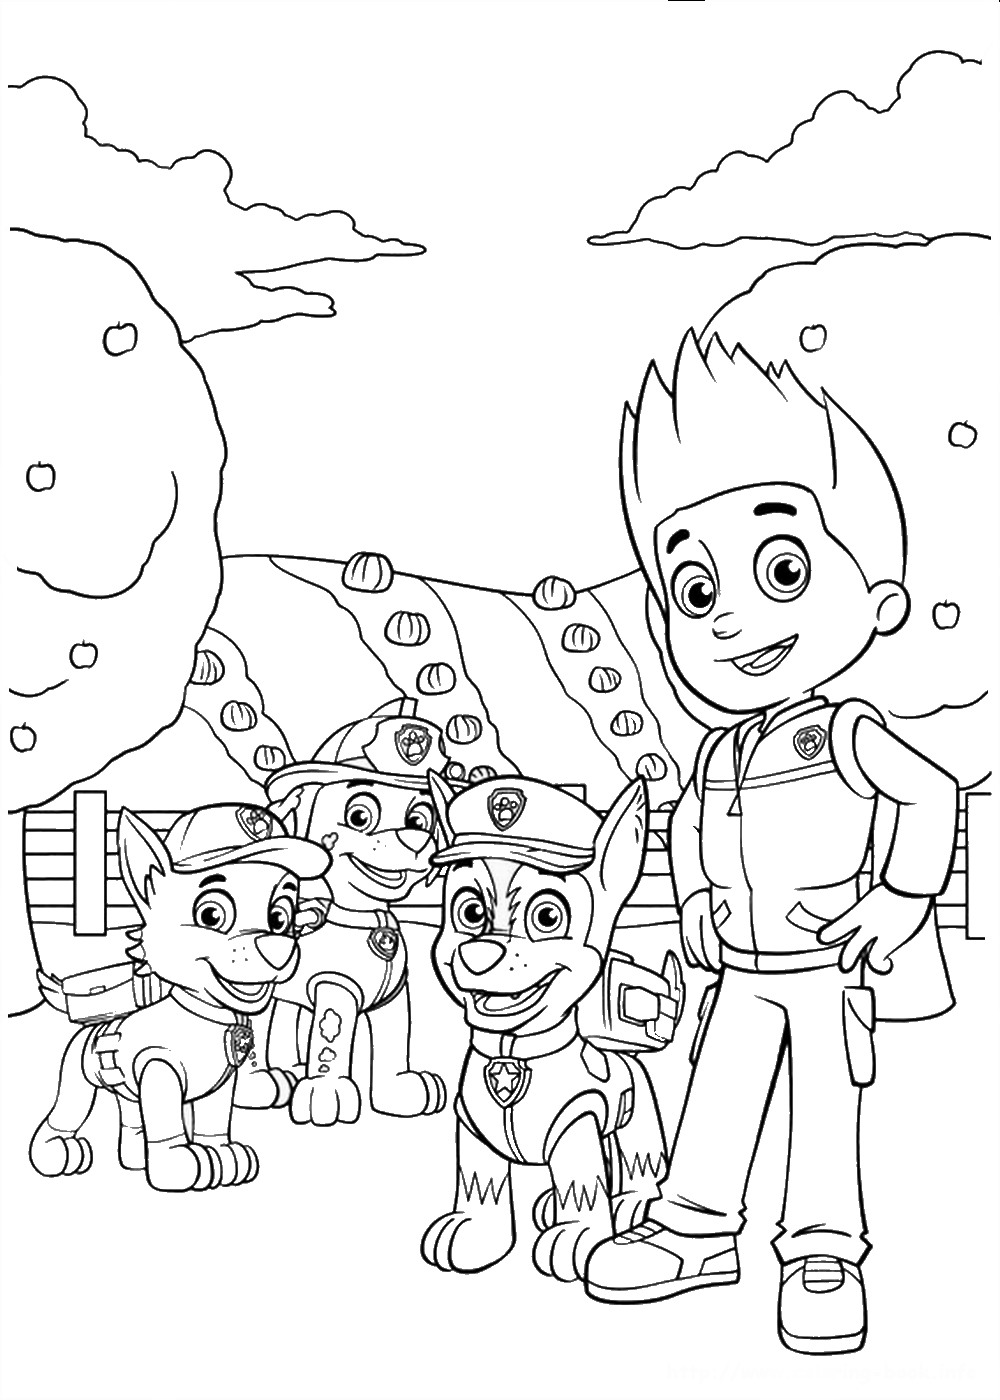 Paw Patrol Coloring Pages FREE Printable 87